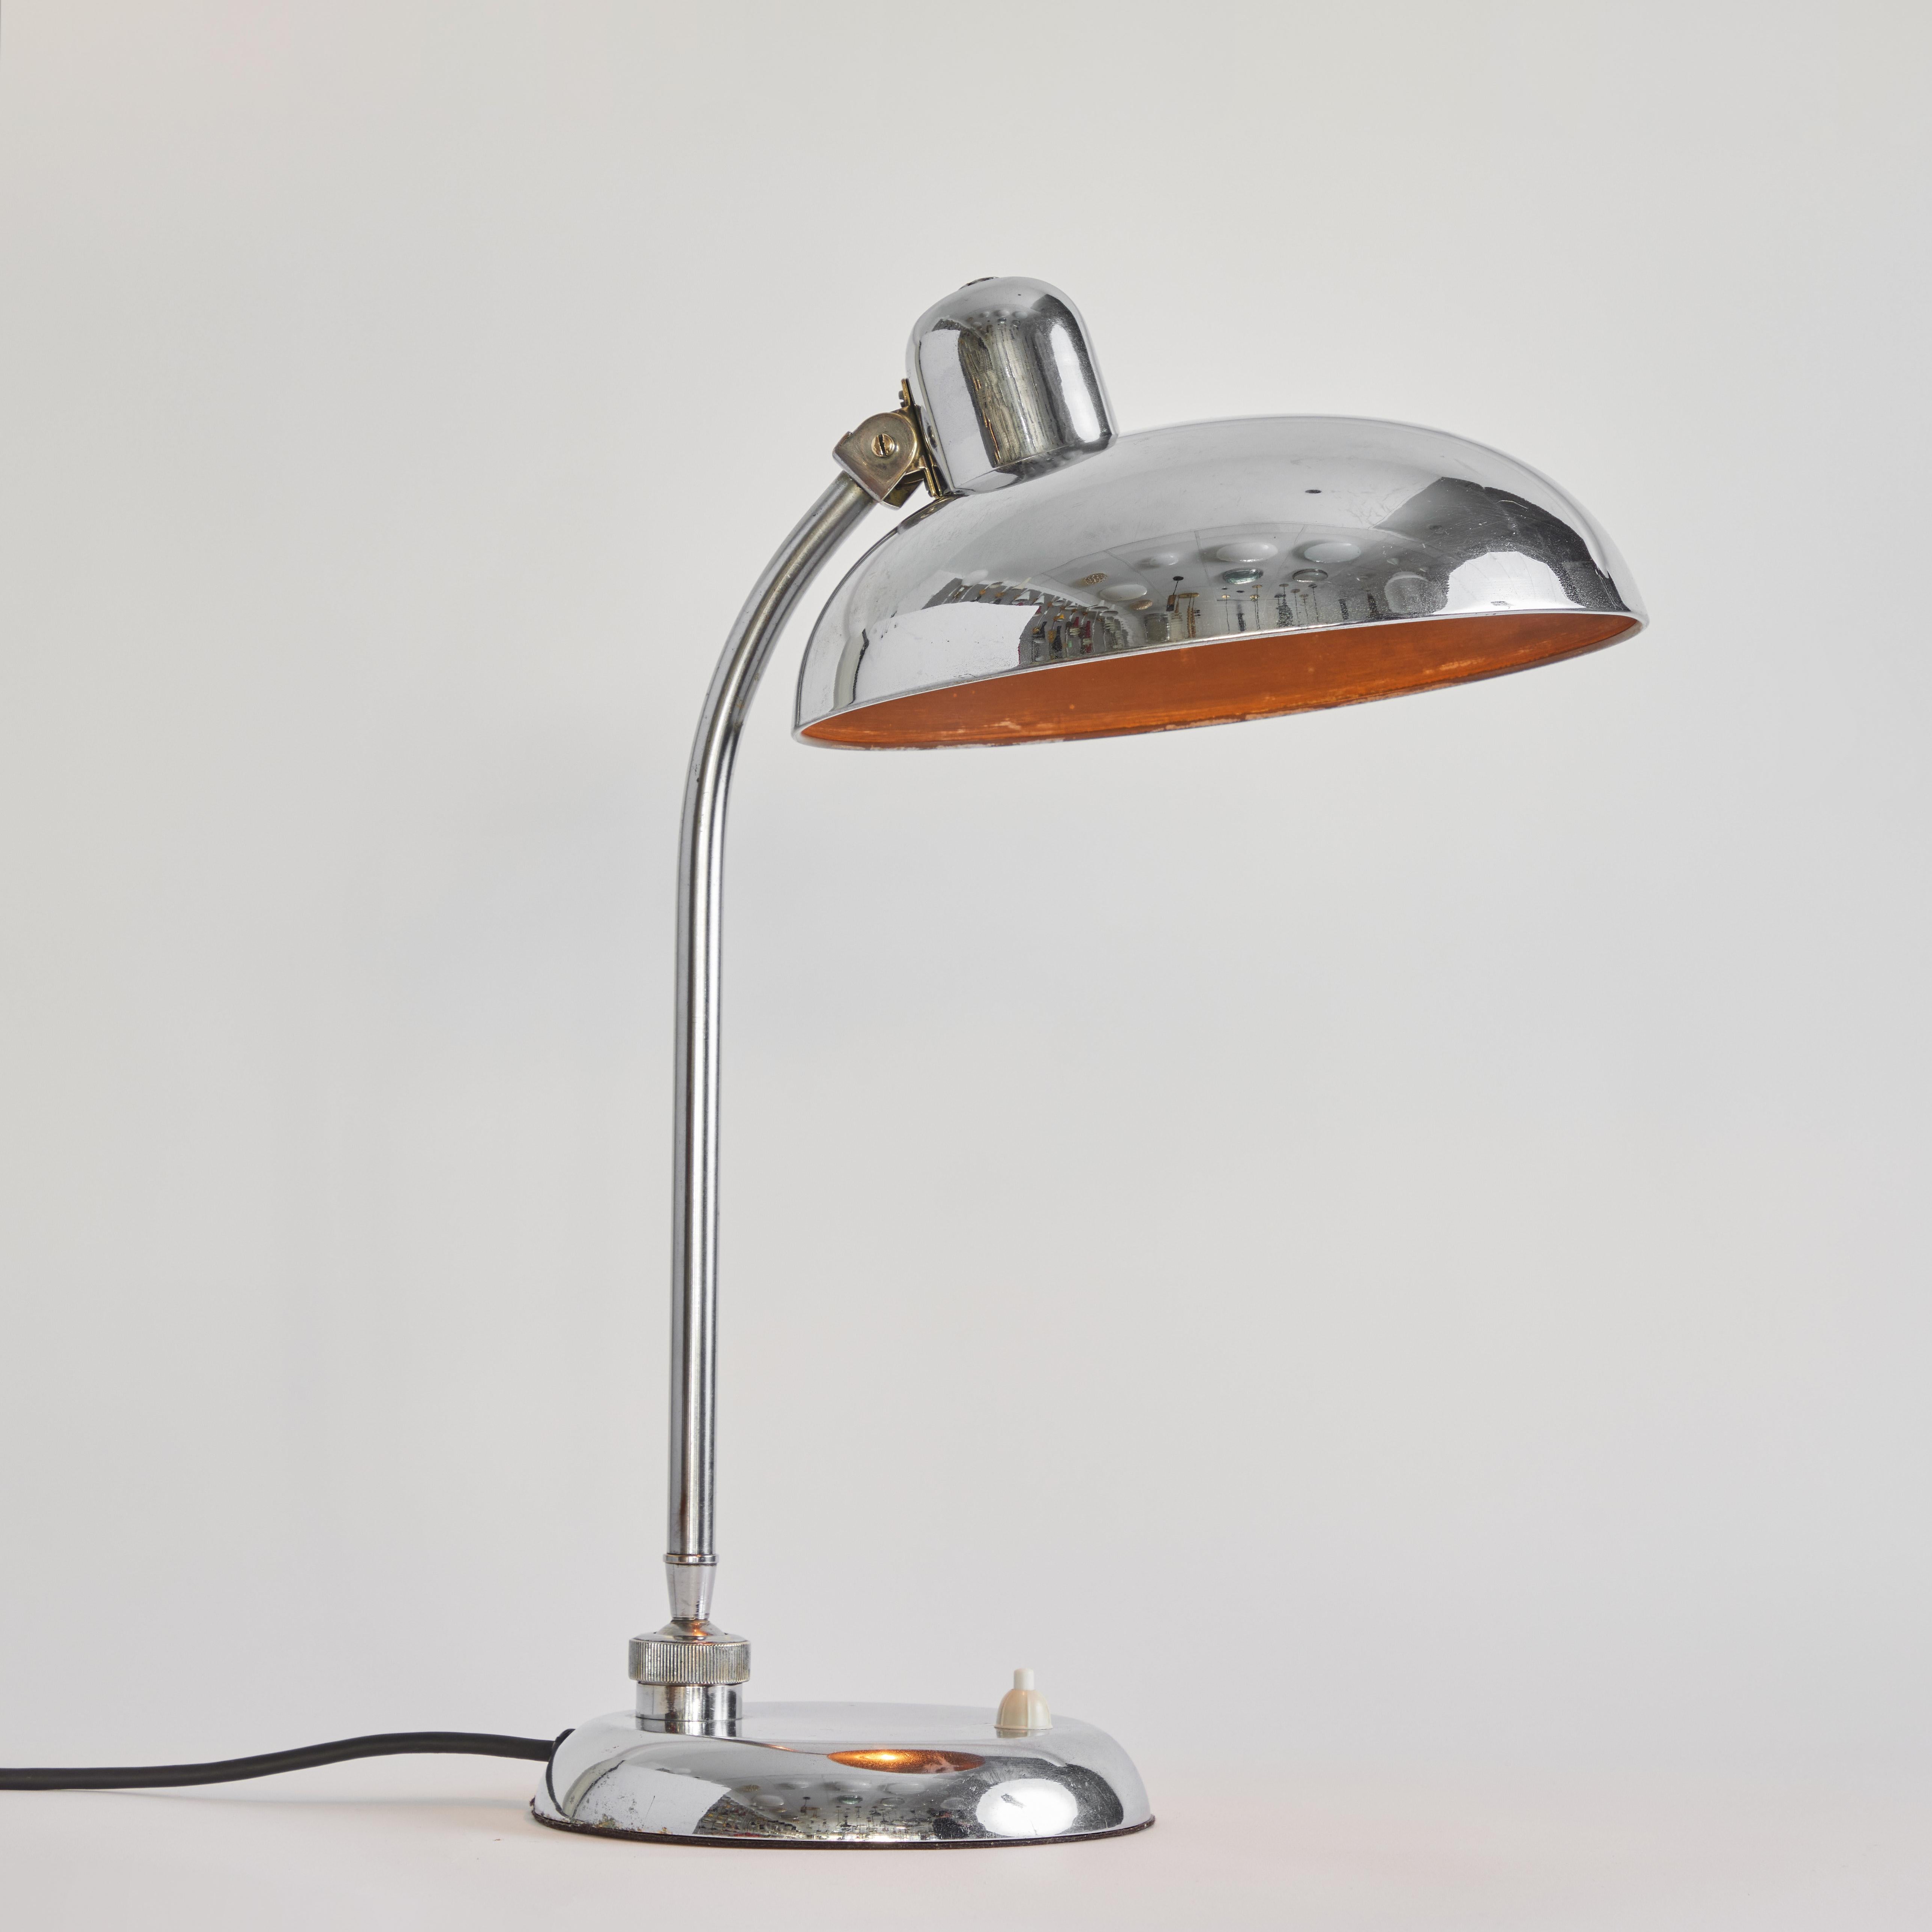 Italian 1940s Giovanni Michelucci Chrome Ministerial Table Lamp for Lariolux For Sale